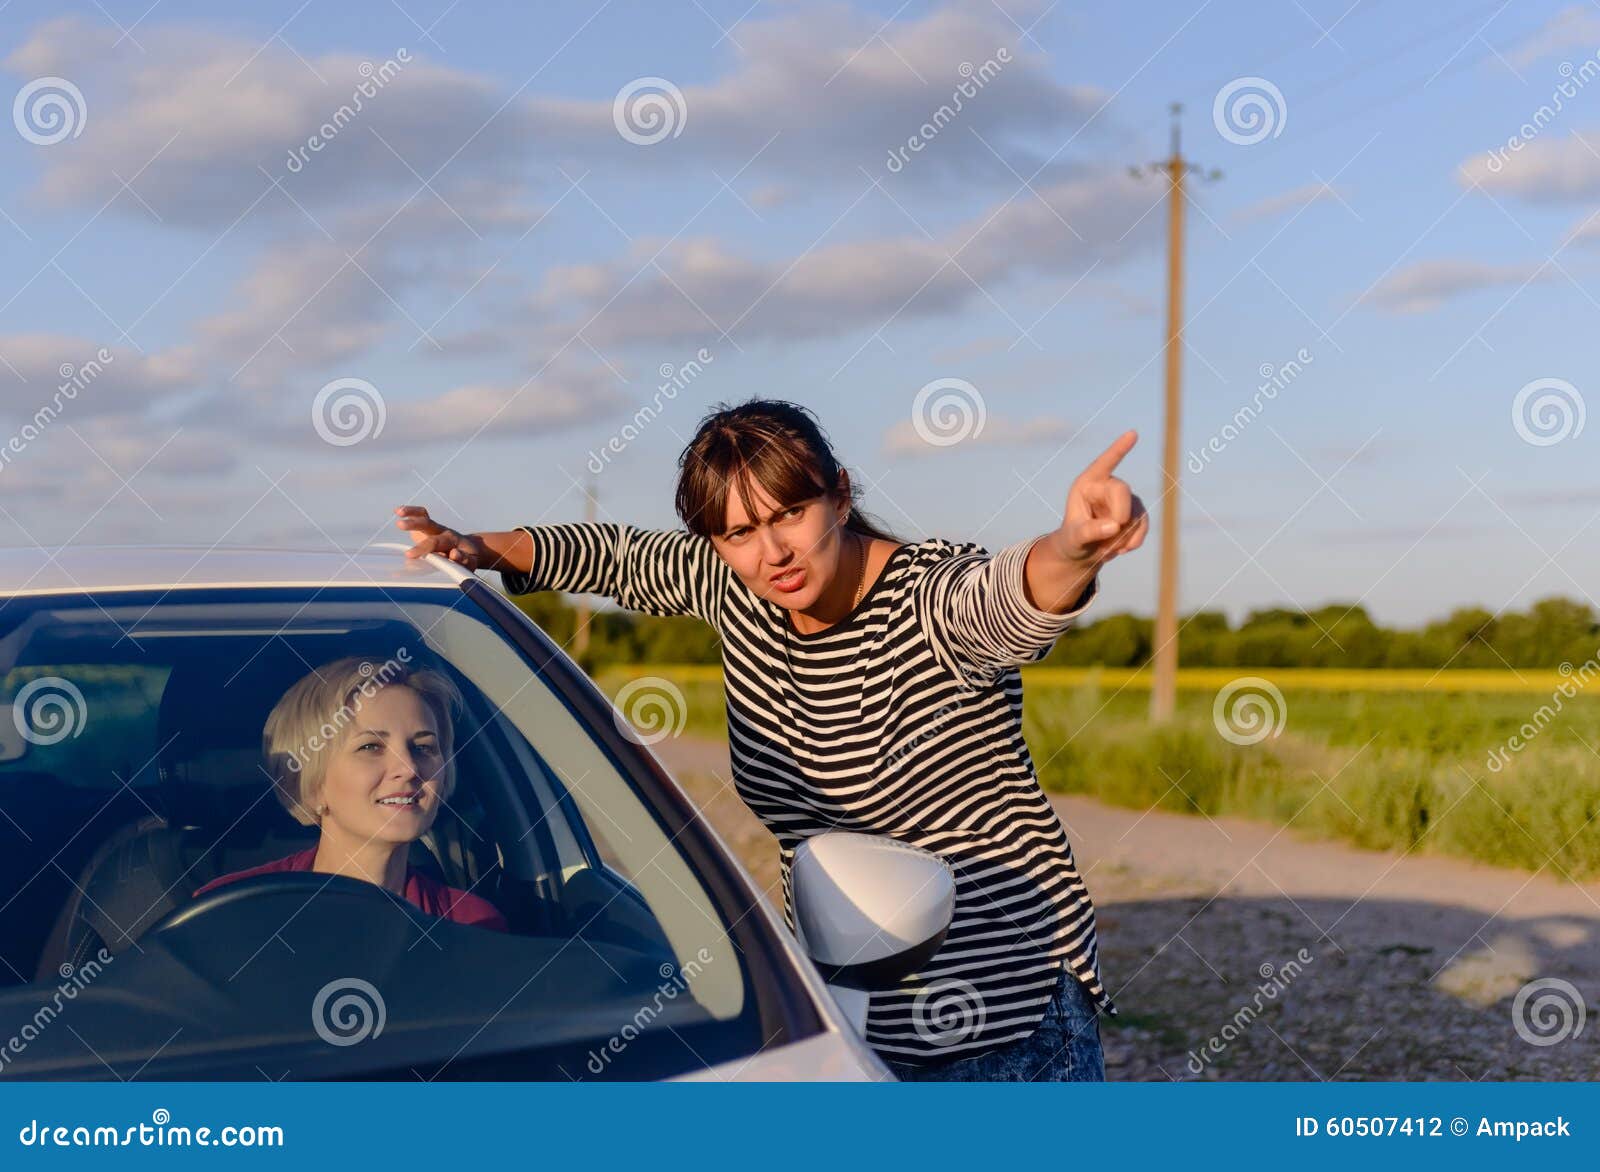 woman giving directions to a lost driver